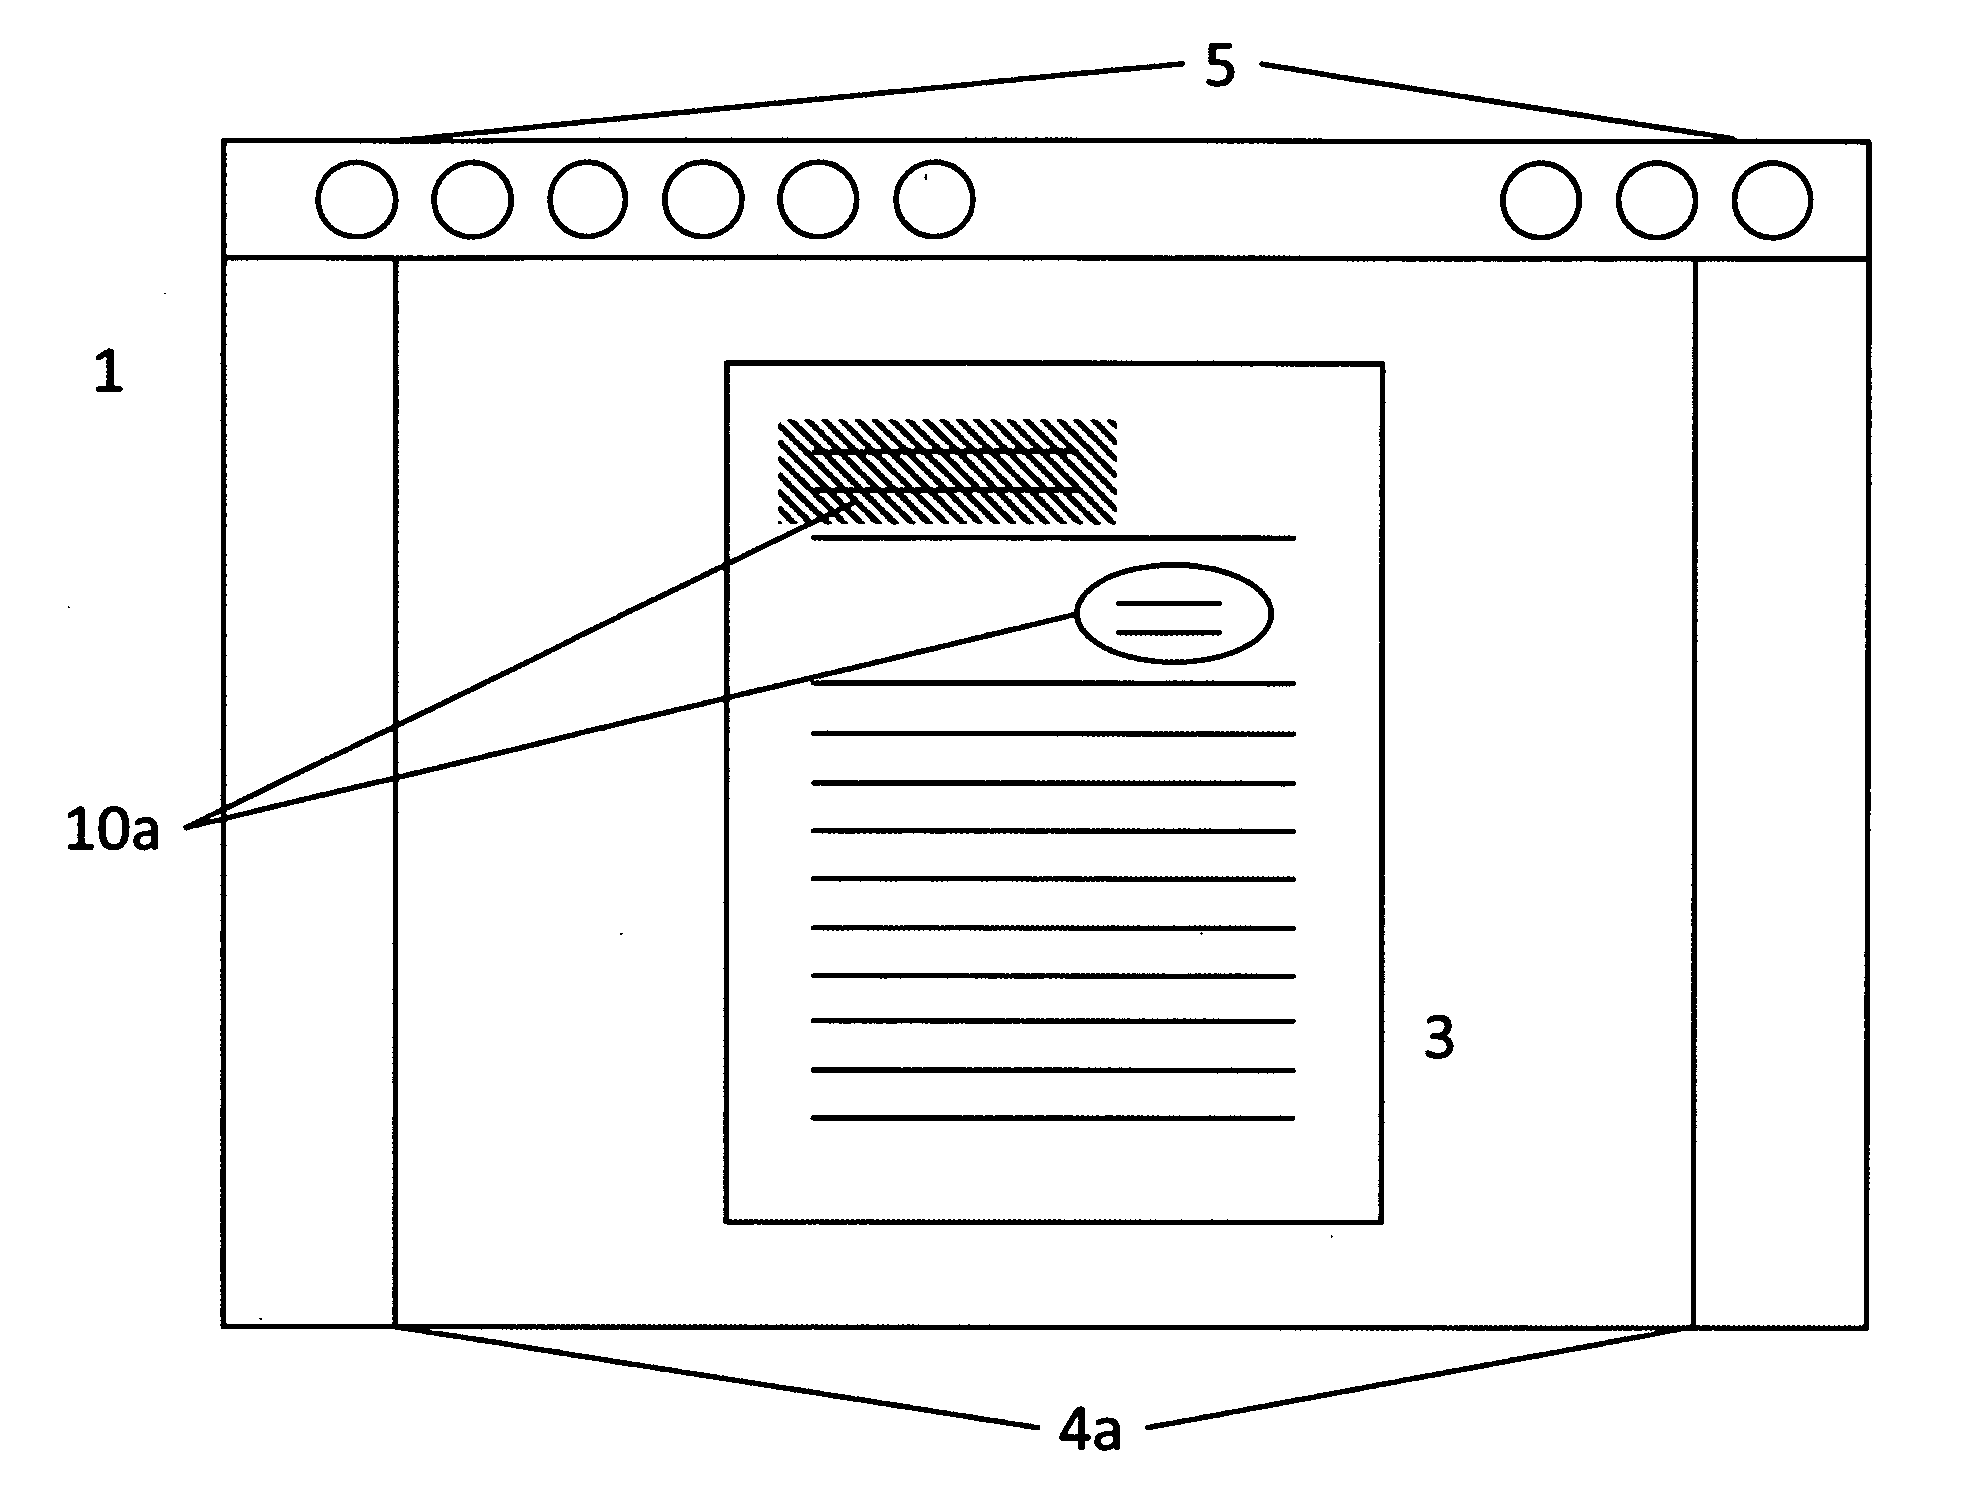 Method and Computer-Readable Medium for Presenting Displayable Content to an Audience